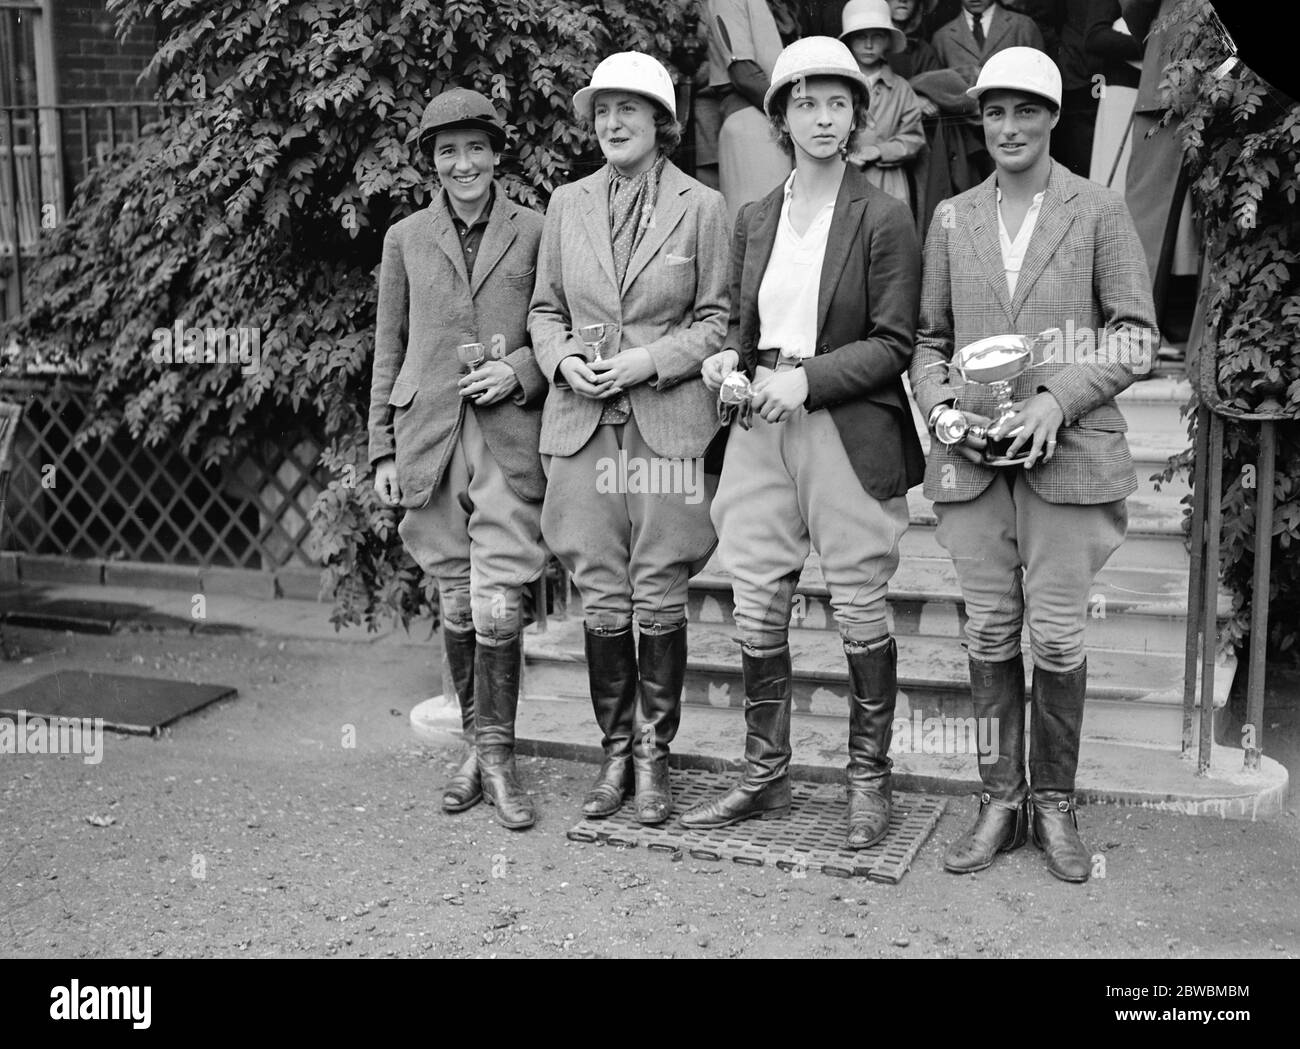 Ladies Polo at Ranelagh . Southdown Ladies versus the National School of Equitation . The National School of Equitation team , from left to right ; Lady Violet Pakenham , Muriel White , Miss Kavanagh and Lady Priscilla Willoughby . 21August 1933 Stock Photo